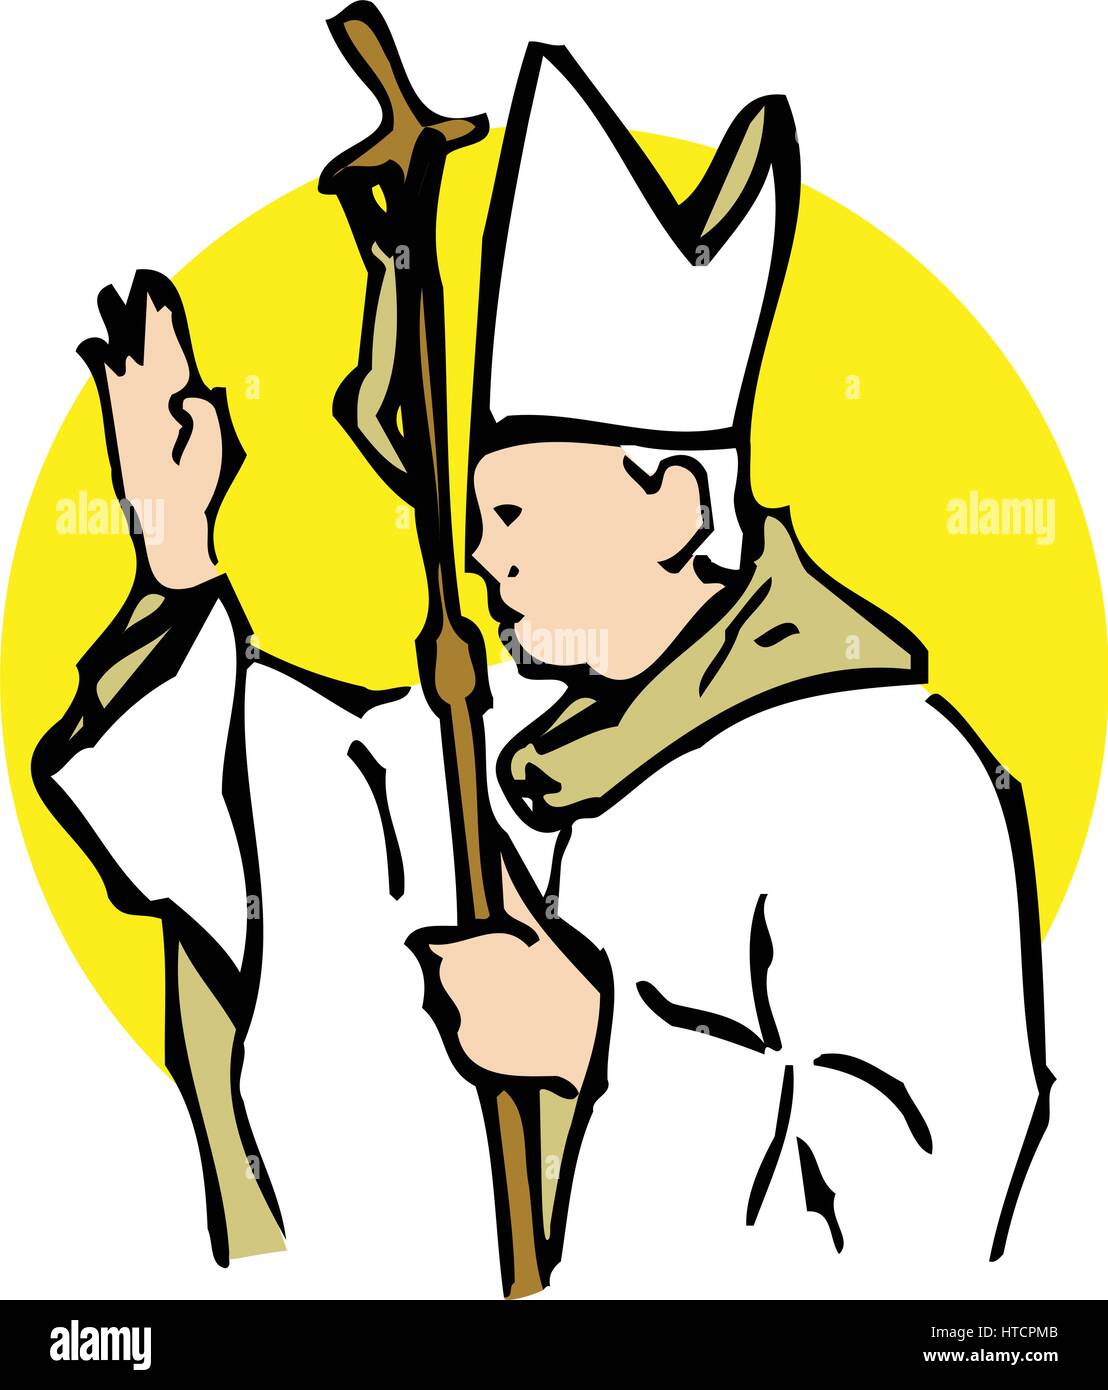 The Pope, leader of the Roman Catholic Church. Stock Vector